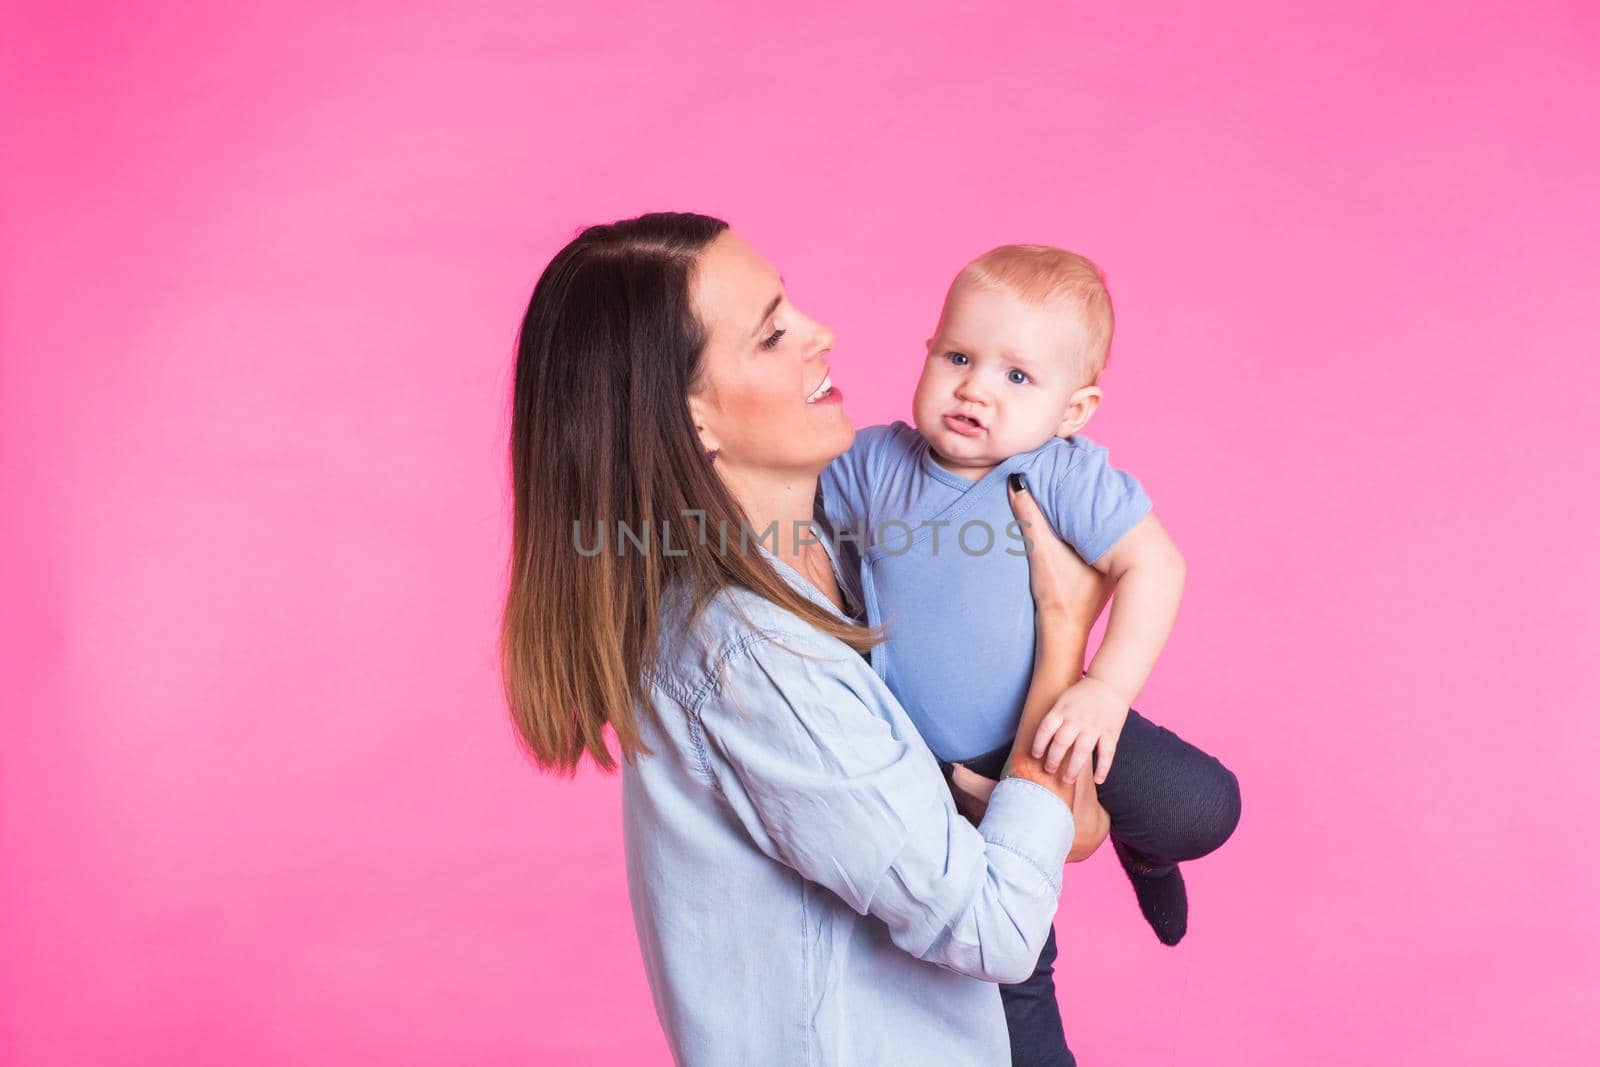 happy young mother with a baby child on pink background.